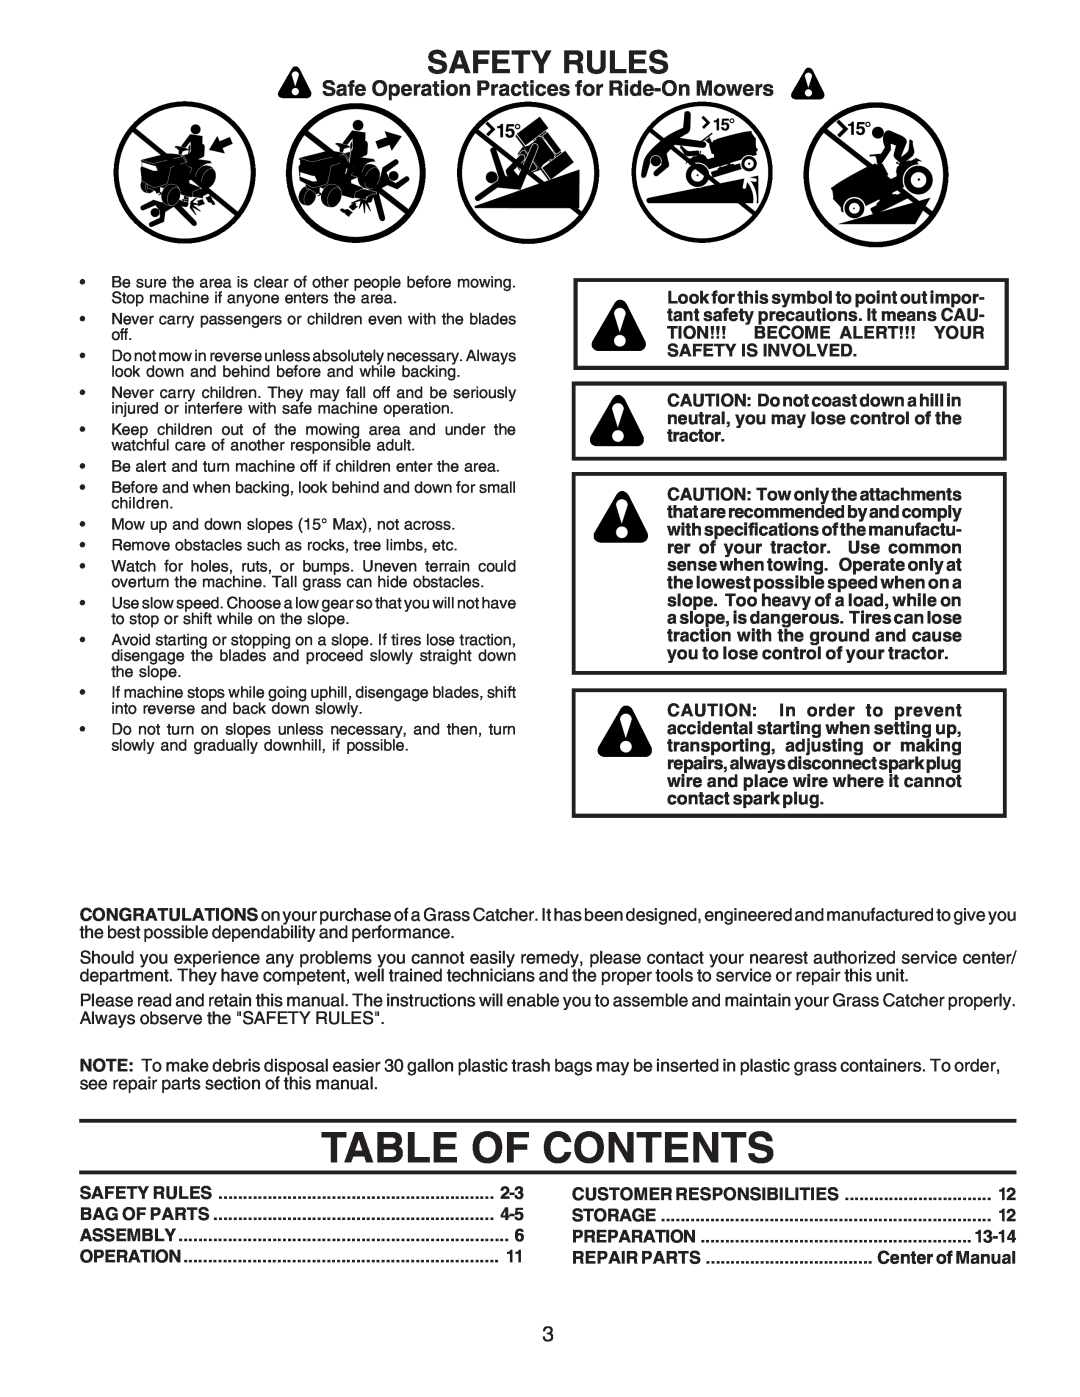 Husqvarna C38D Table Of Contents, Safety Rules, Safe Operation Practices for Ride-On Mowers, Customer Responsibilities 